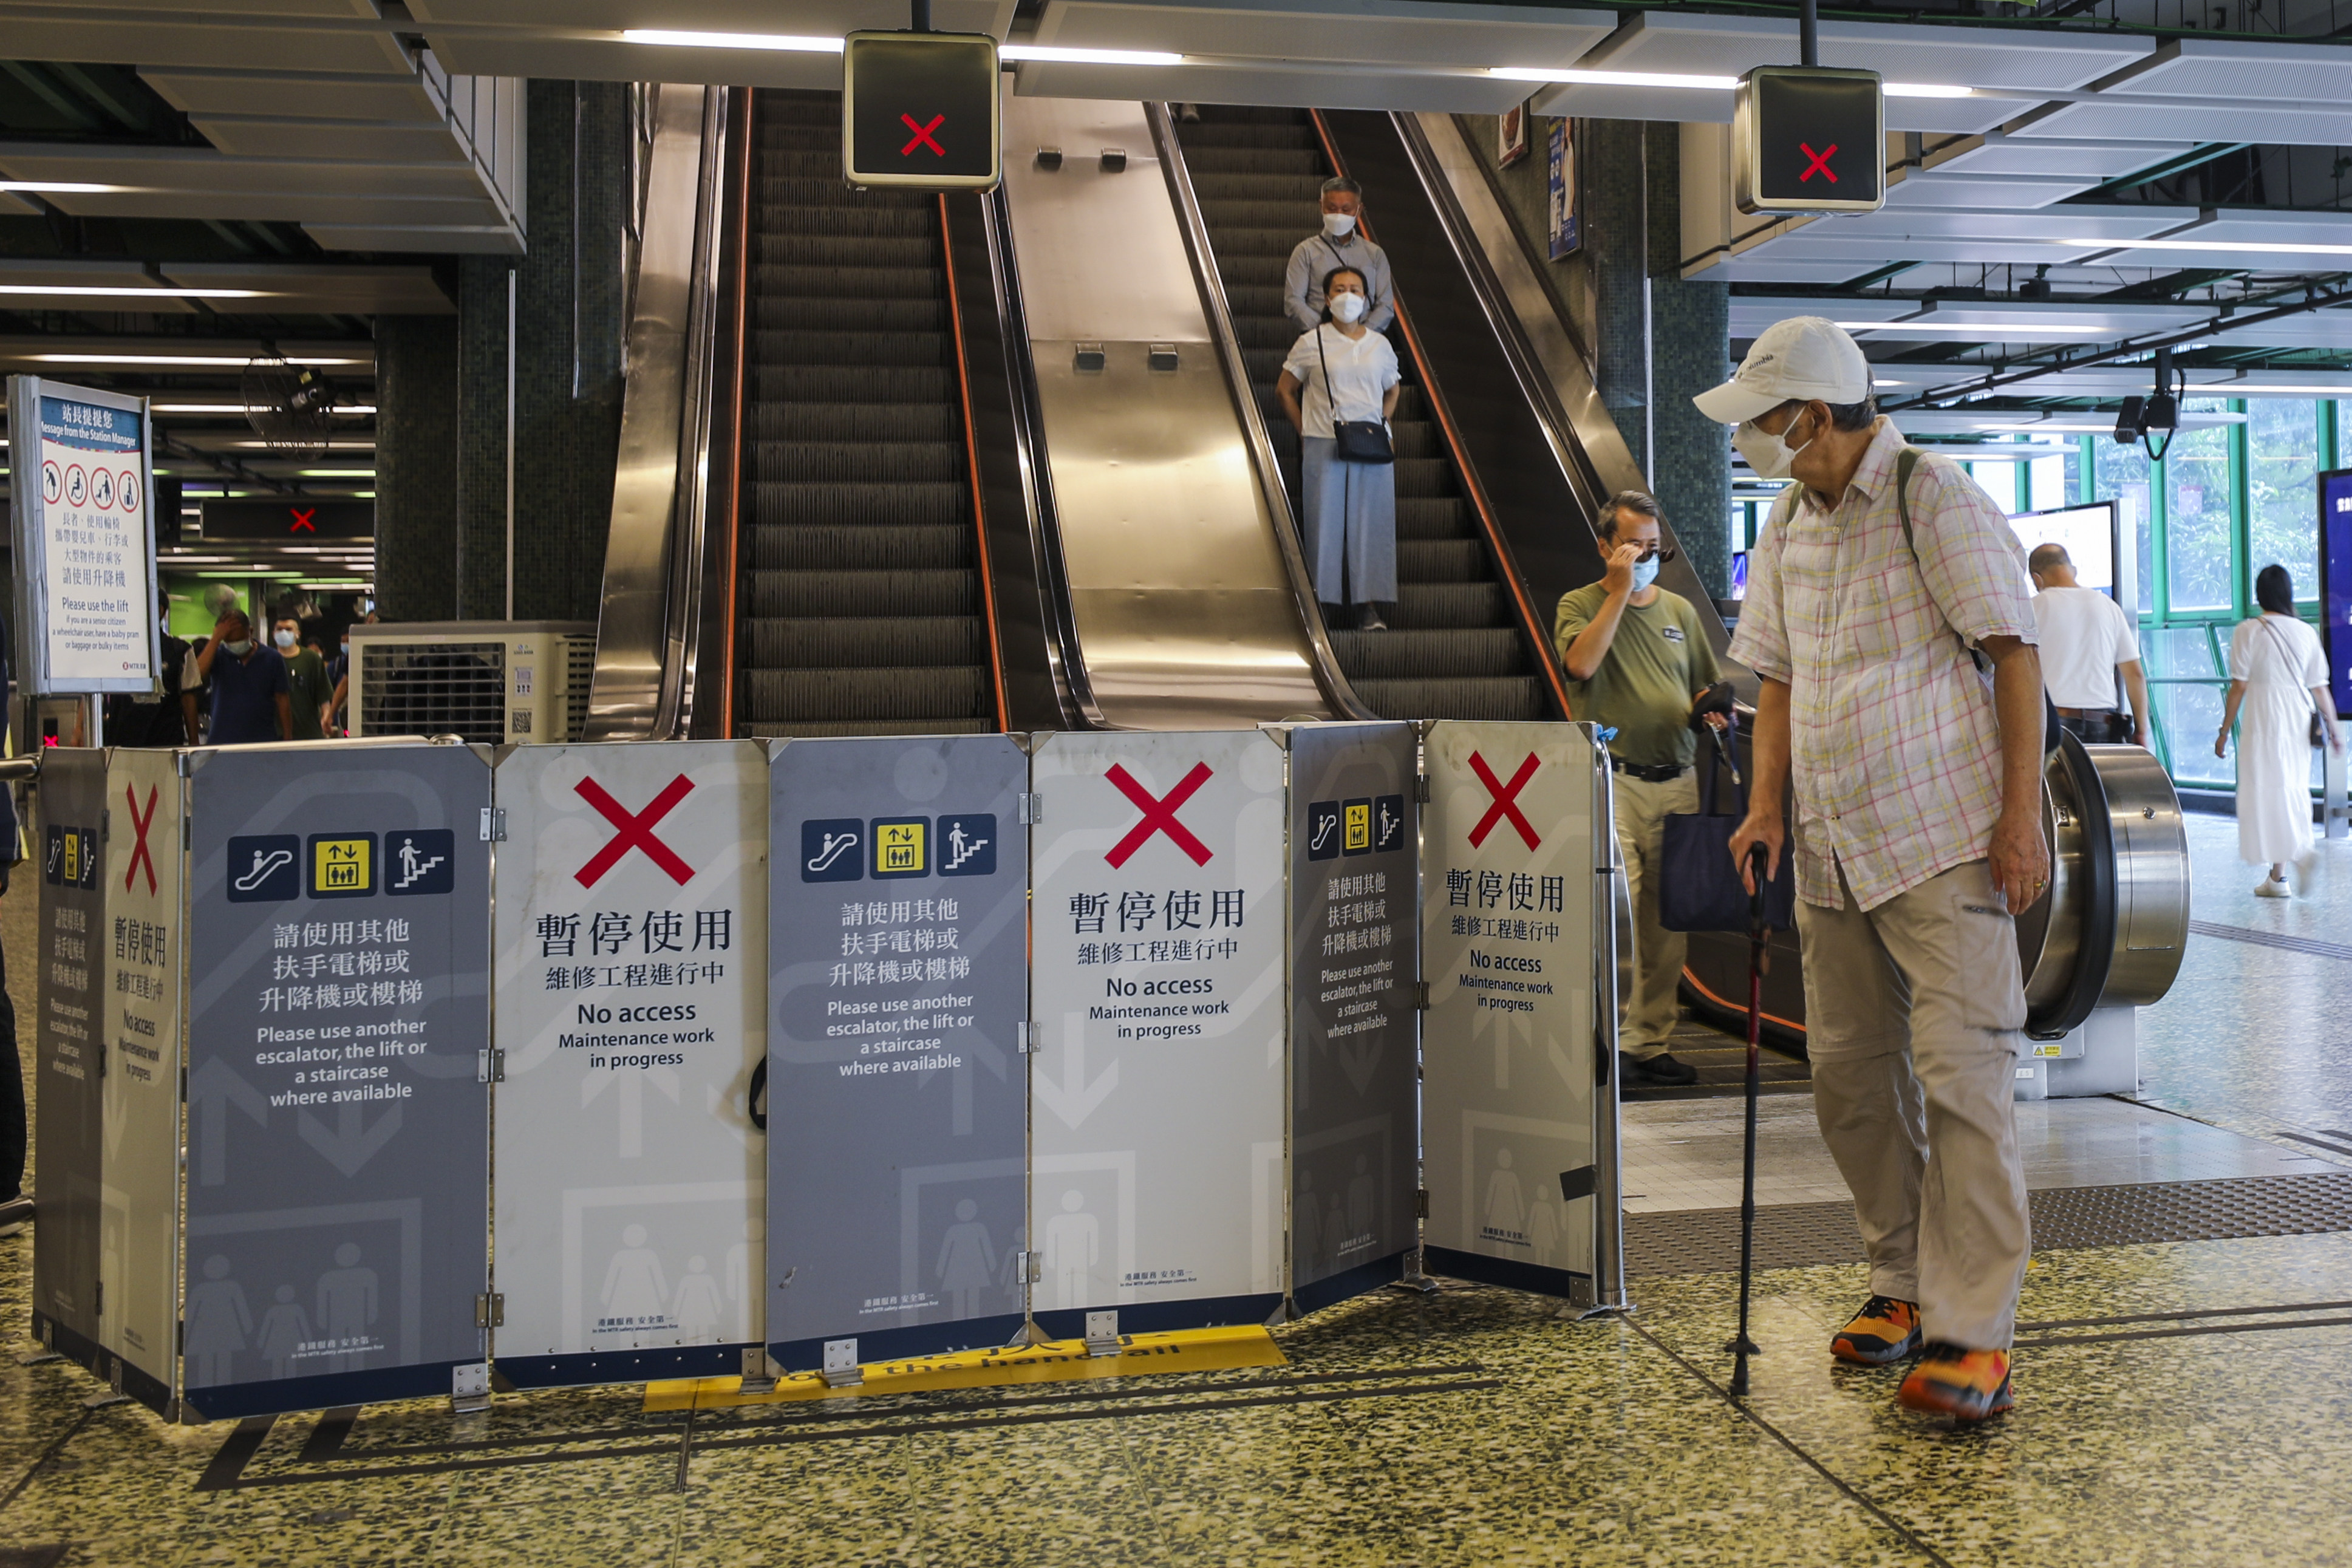 The escalator’s comb plates and steps at Chai Wan MTR station were damaged. Photo: Xiaomei Chen